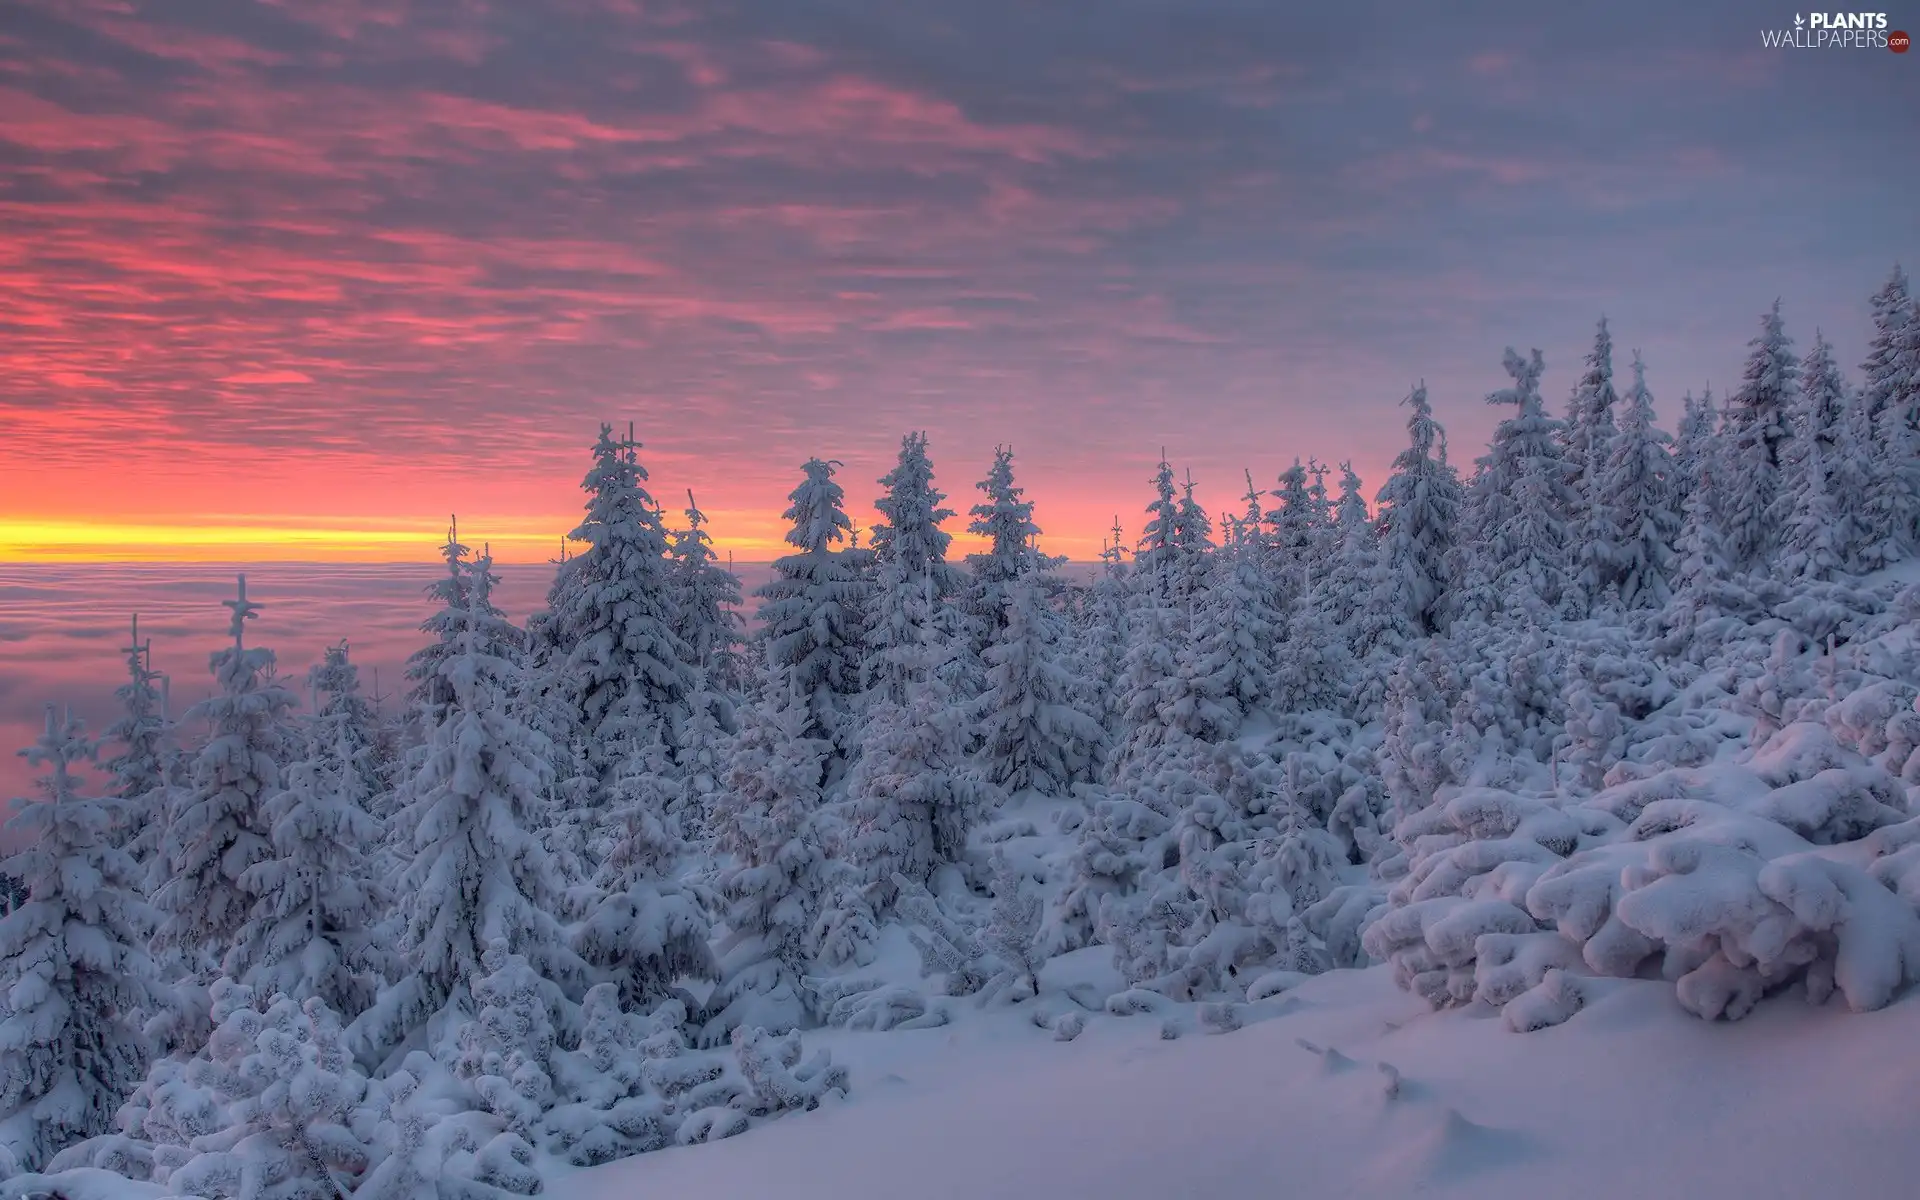 Snowy, winter, color, Sky, Spruces, Great Sunsets